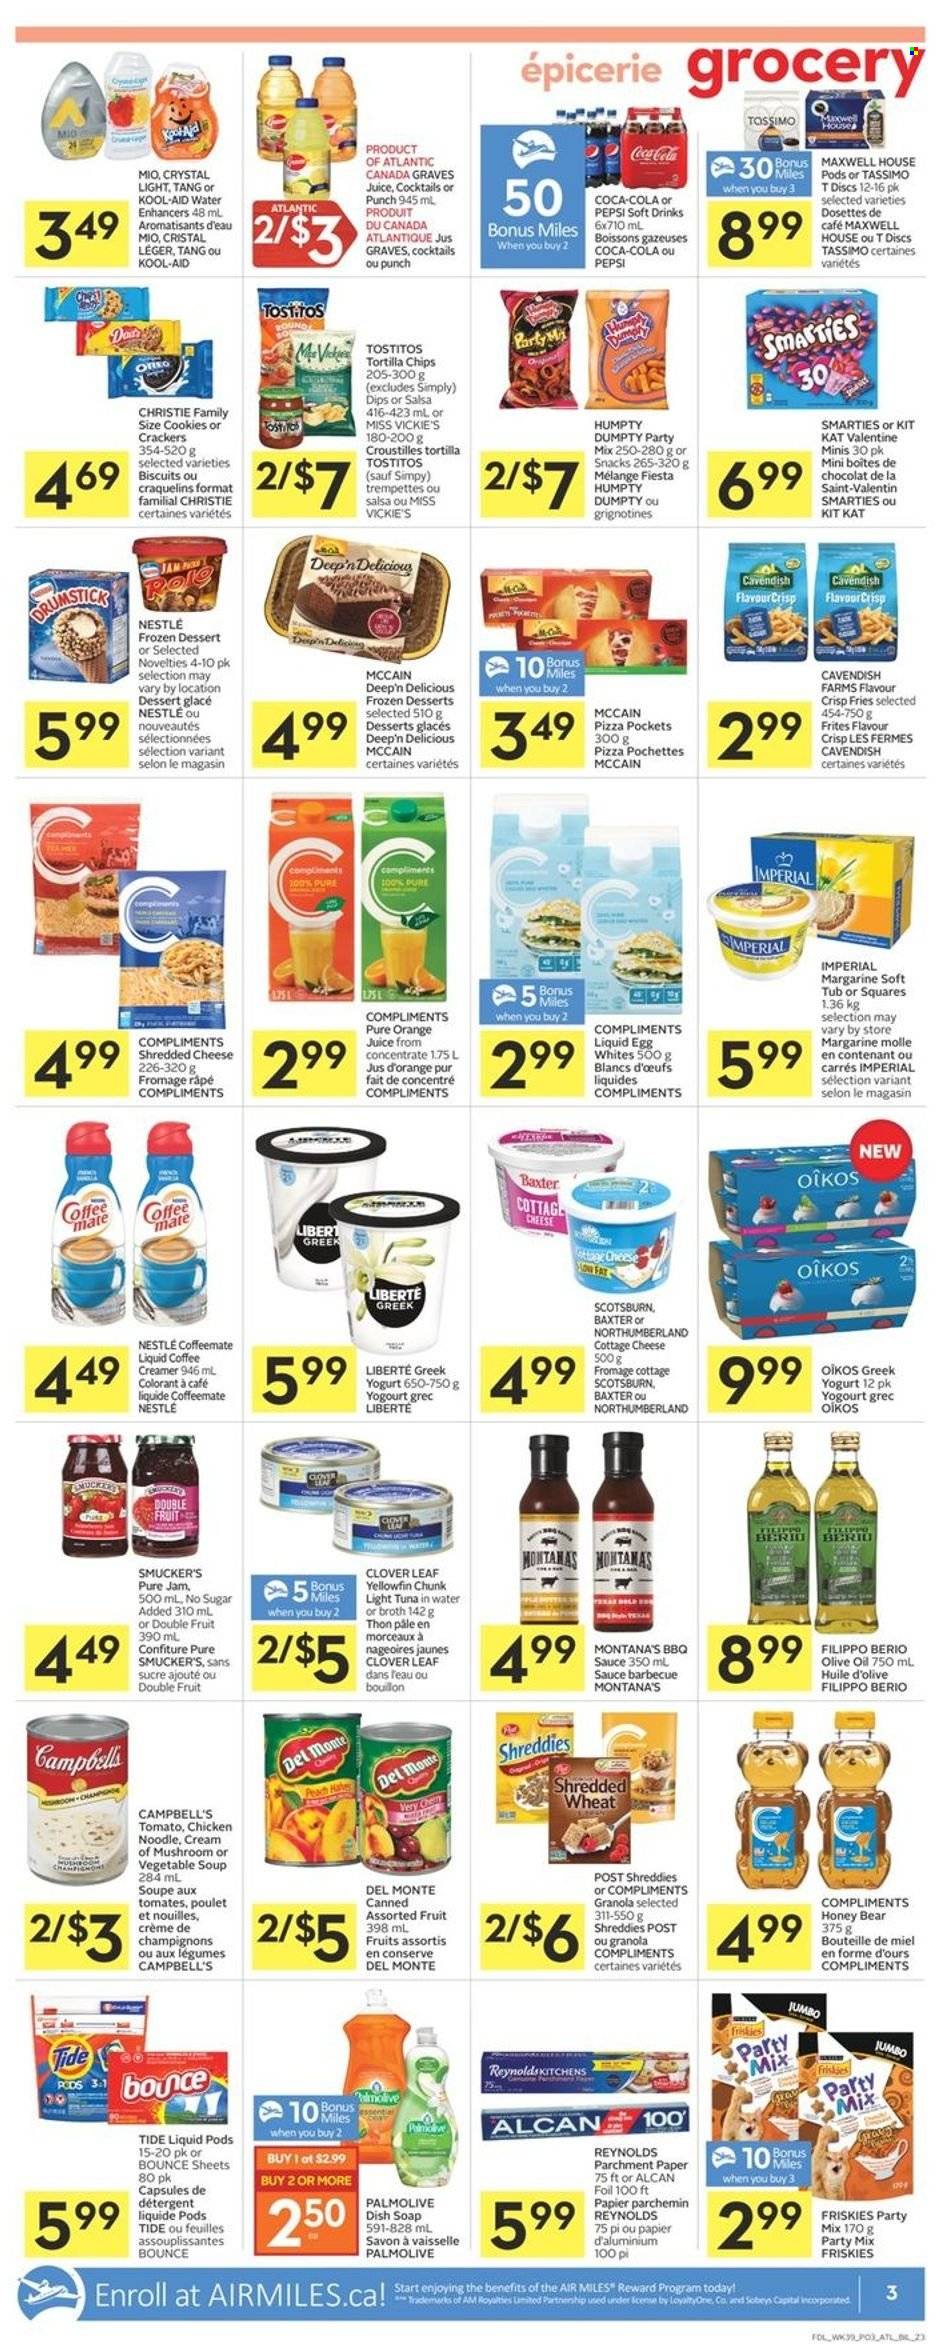 thumbnail - Co-op Flyer - January 20, 2022 - January 26, 2022 - Sales products - tuna, Campbell's, vegetable soup, pizza, soup, sauce, noodles, cottage cheese, shredded cheese, greek yoghurt, yoghurt, Clover, Oikos, eggs, margarine, creamer, McCain, potato fries, cookies, KitKat, crackers, biscuit, tortilla chips, Tostitos, bouillon, broth, tuna in water, light tuna, BBQ sauce, salsa, olive oil, oil, honey, fruit jam, Coca-Cola, Pepsi, orange juice, juice, soft drink, Maxwell House, Nestlé, detergent, granola, Smarties. Page 5.